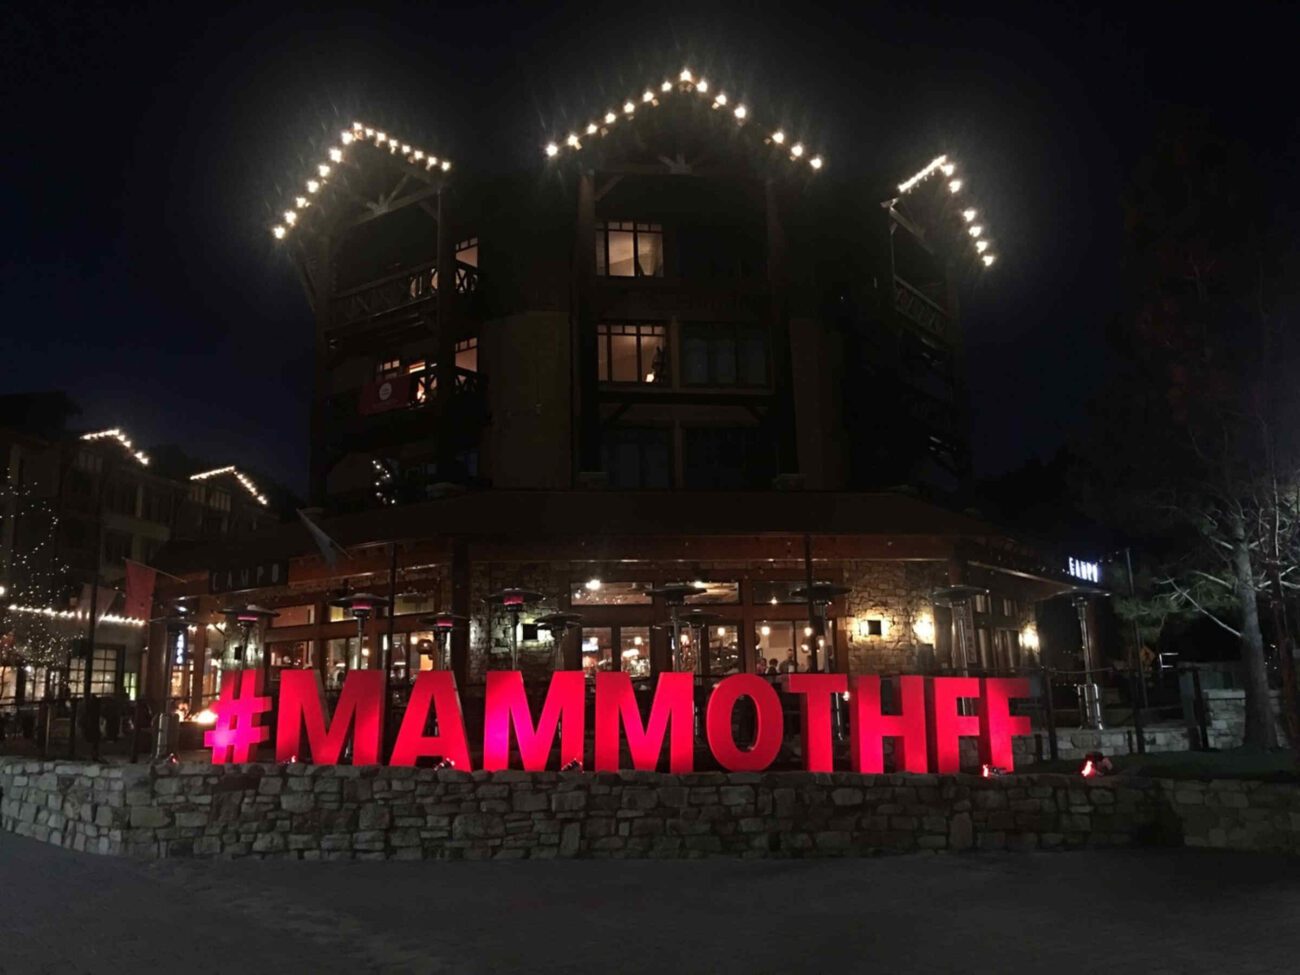 Take a peek behind the glamorous curtain and learn more about the hard-working team bringing the 2022 Mammoth Film Festival to California!